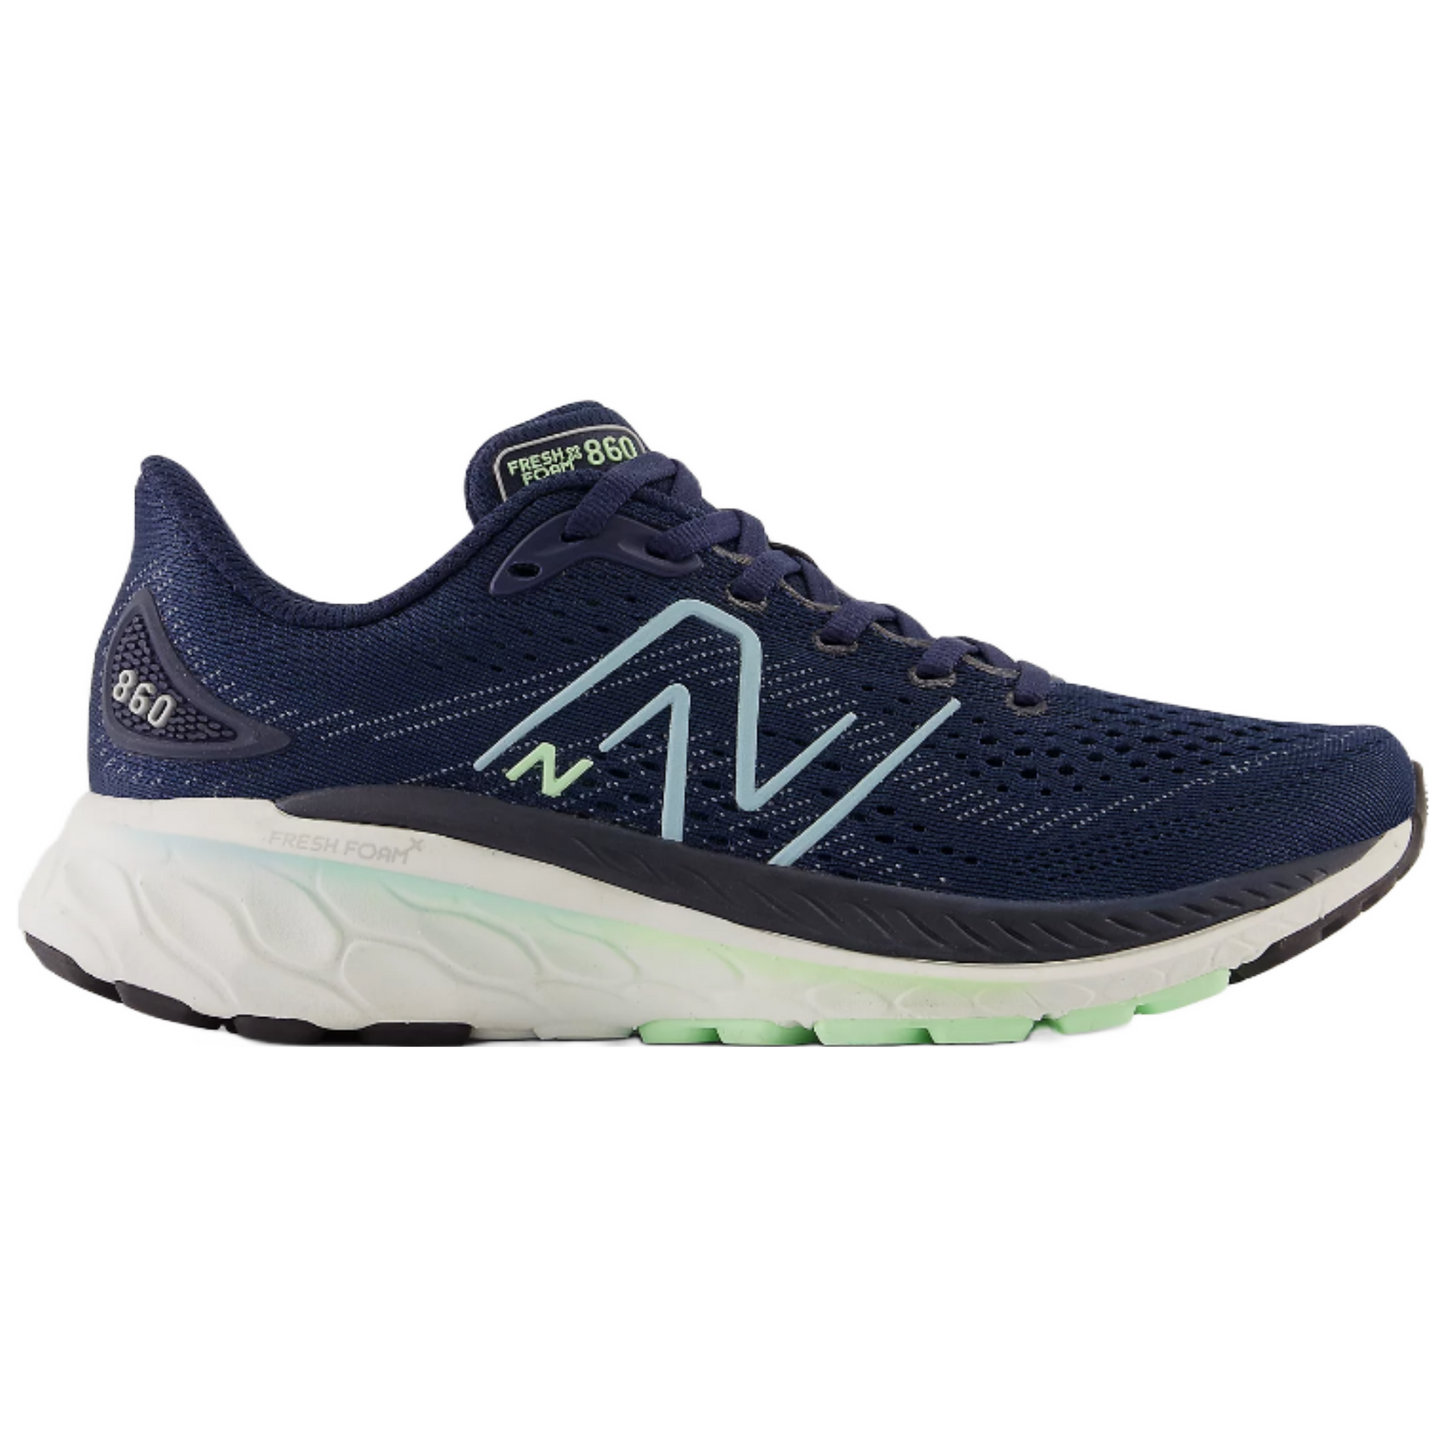 New Balance Women's 860 stability running shoes in navy